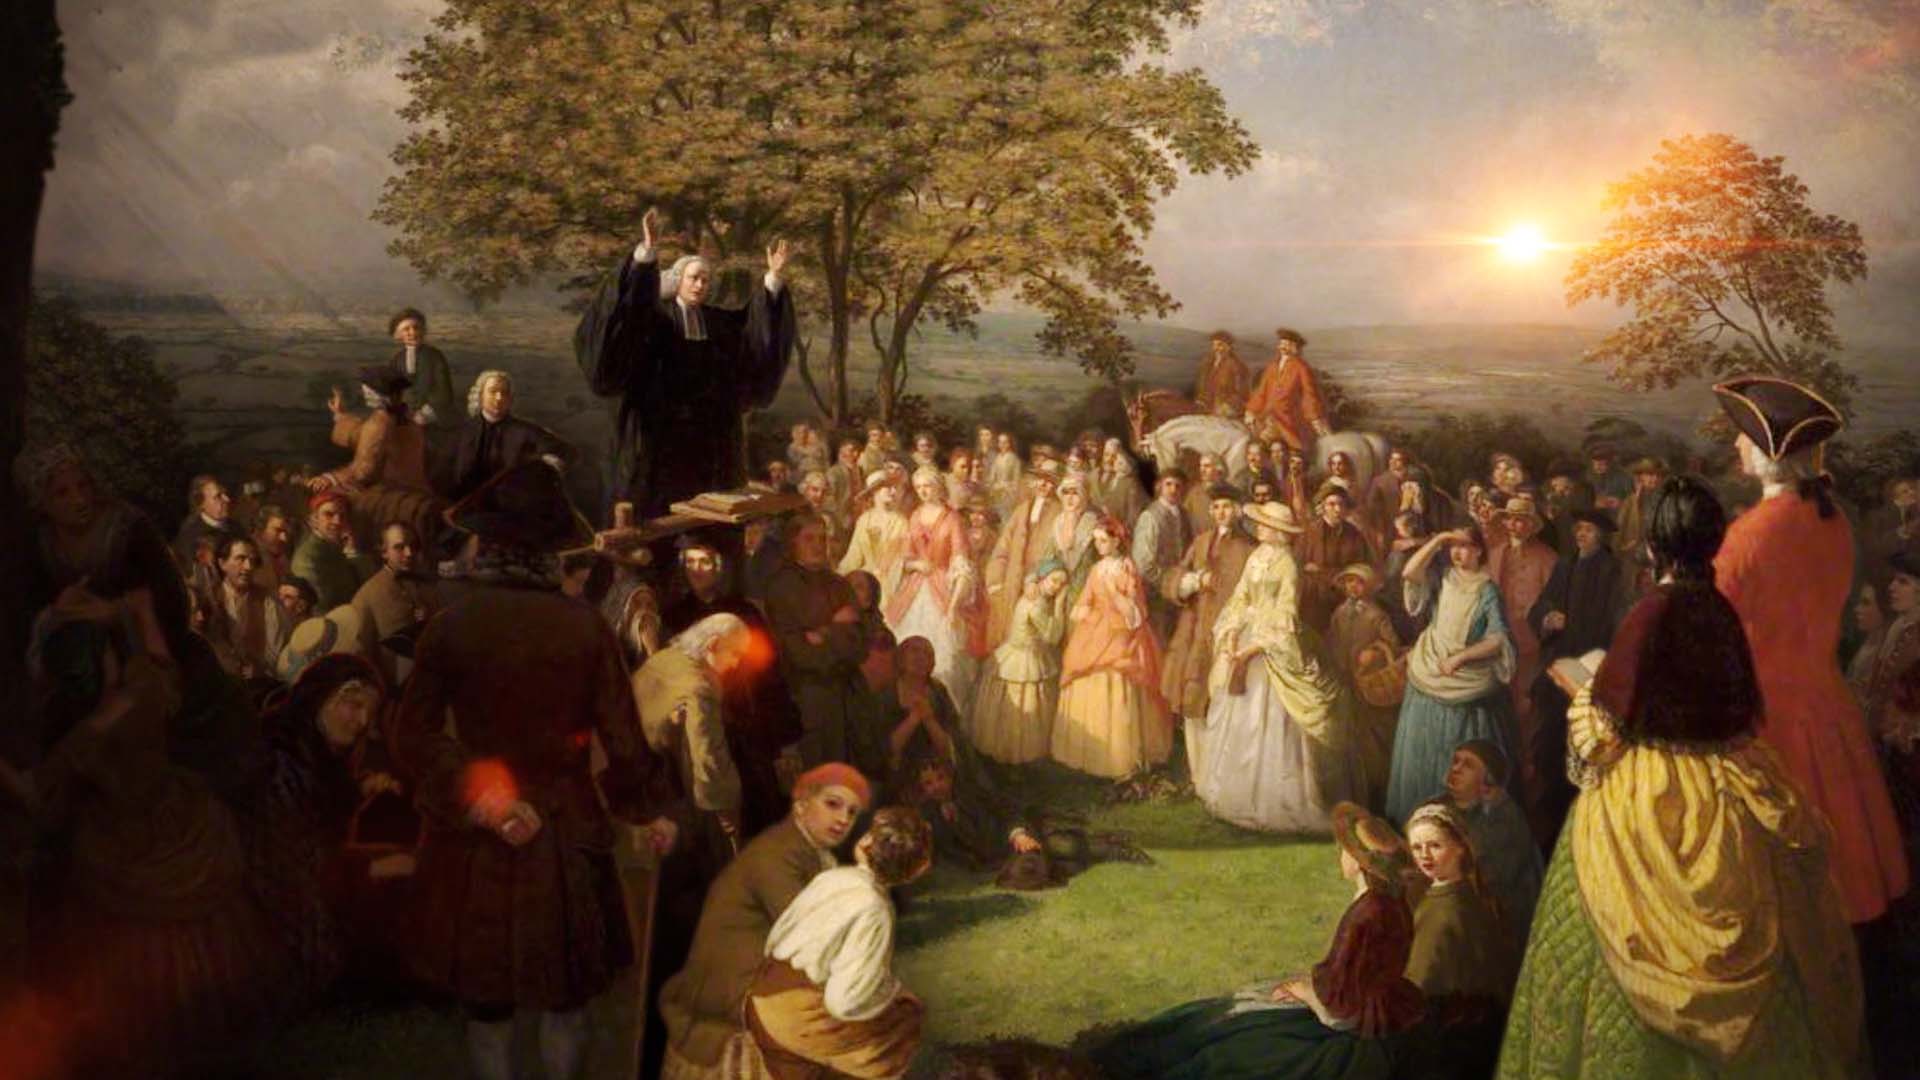 how did the great awakening influence the american revolution